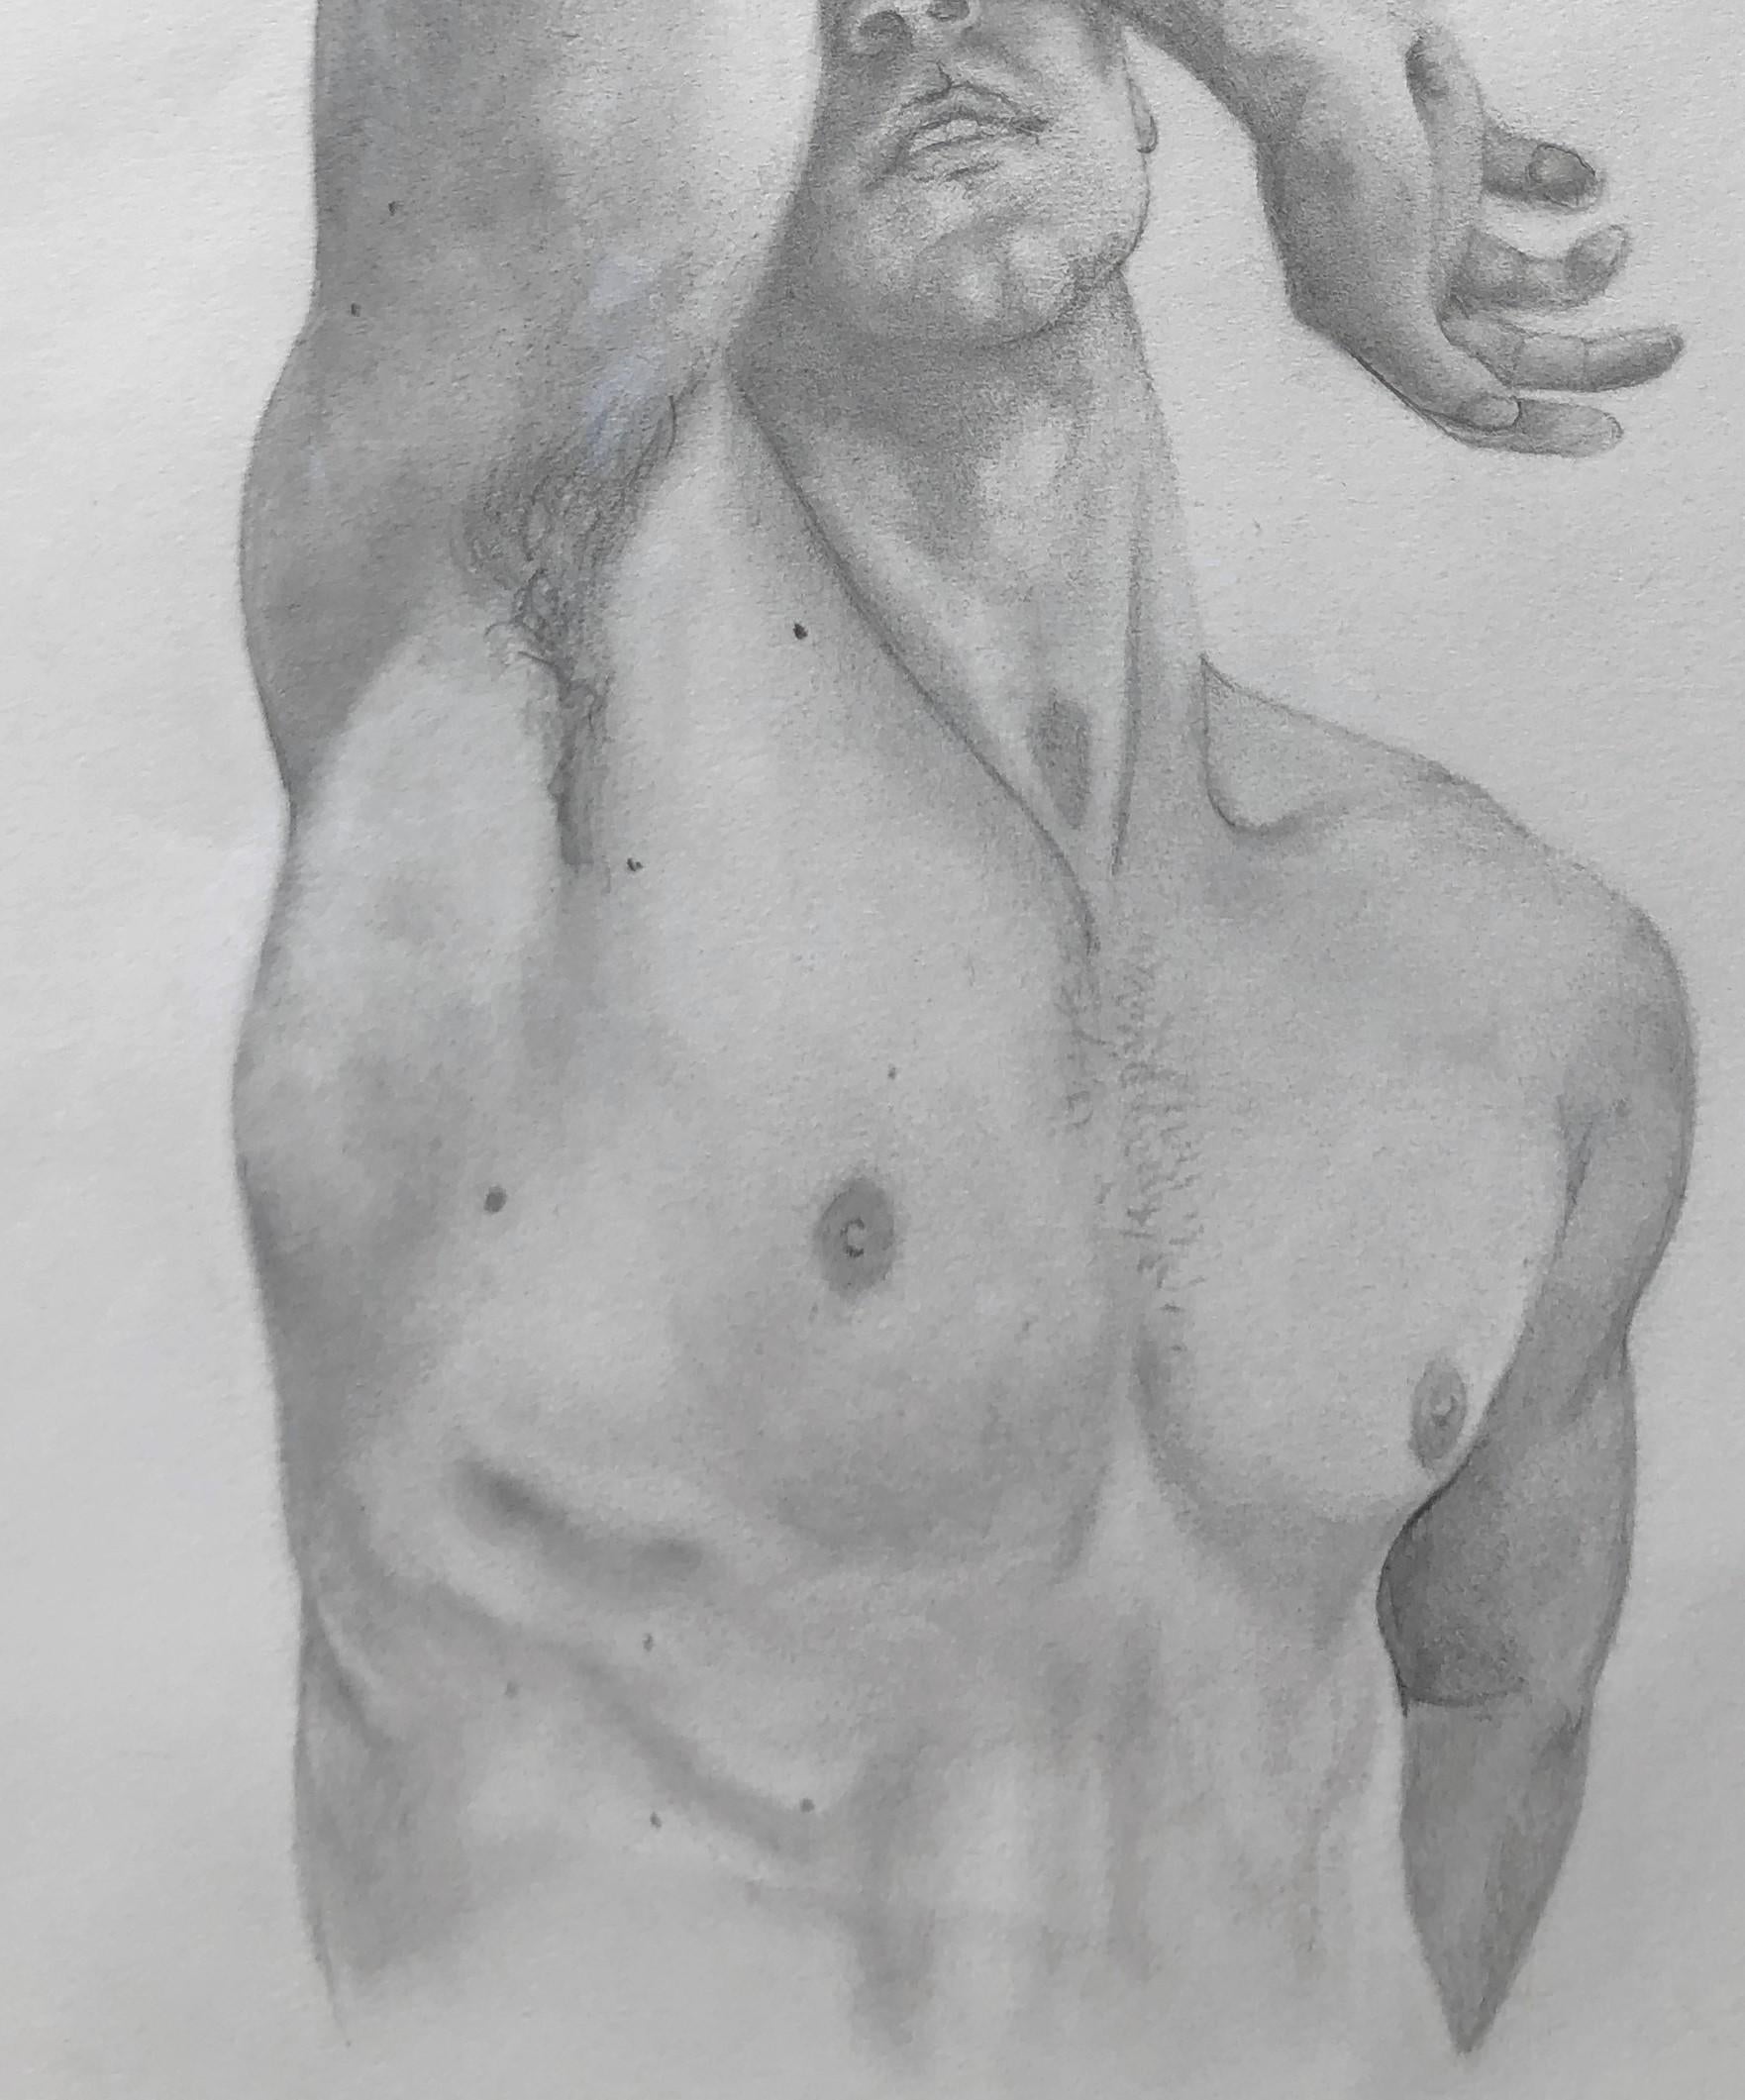 Rick Sindt's knowledge of the male physique is evident in this exquisite drawing of a nude male.  The subject protects himself by using his arm to shield his face from the viewer.  We are only privy to the beautifully muscled torso of this anonymous